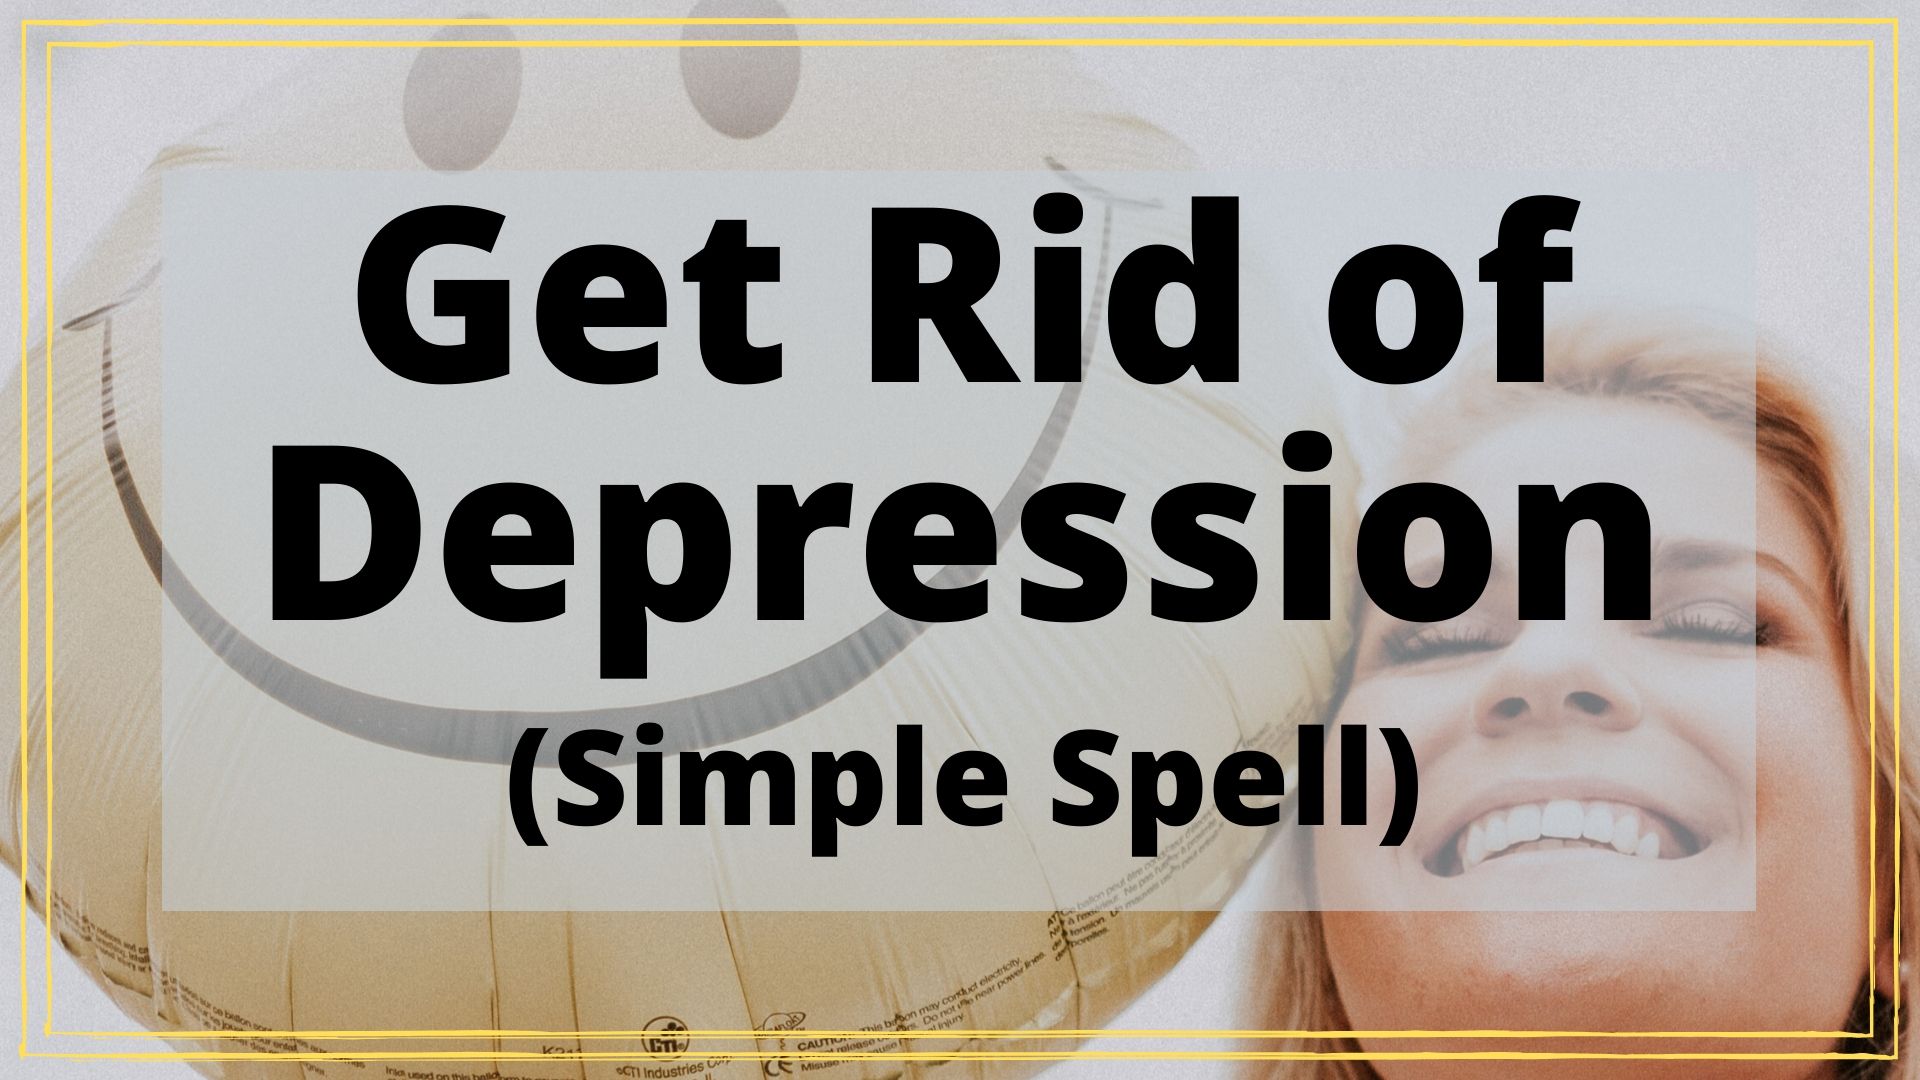 A Spell to Get Rid of Depression